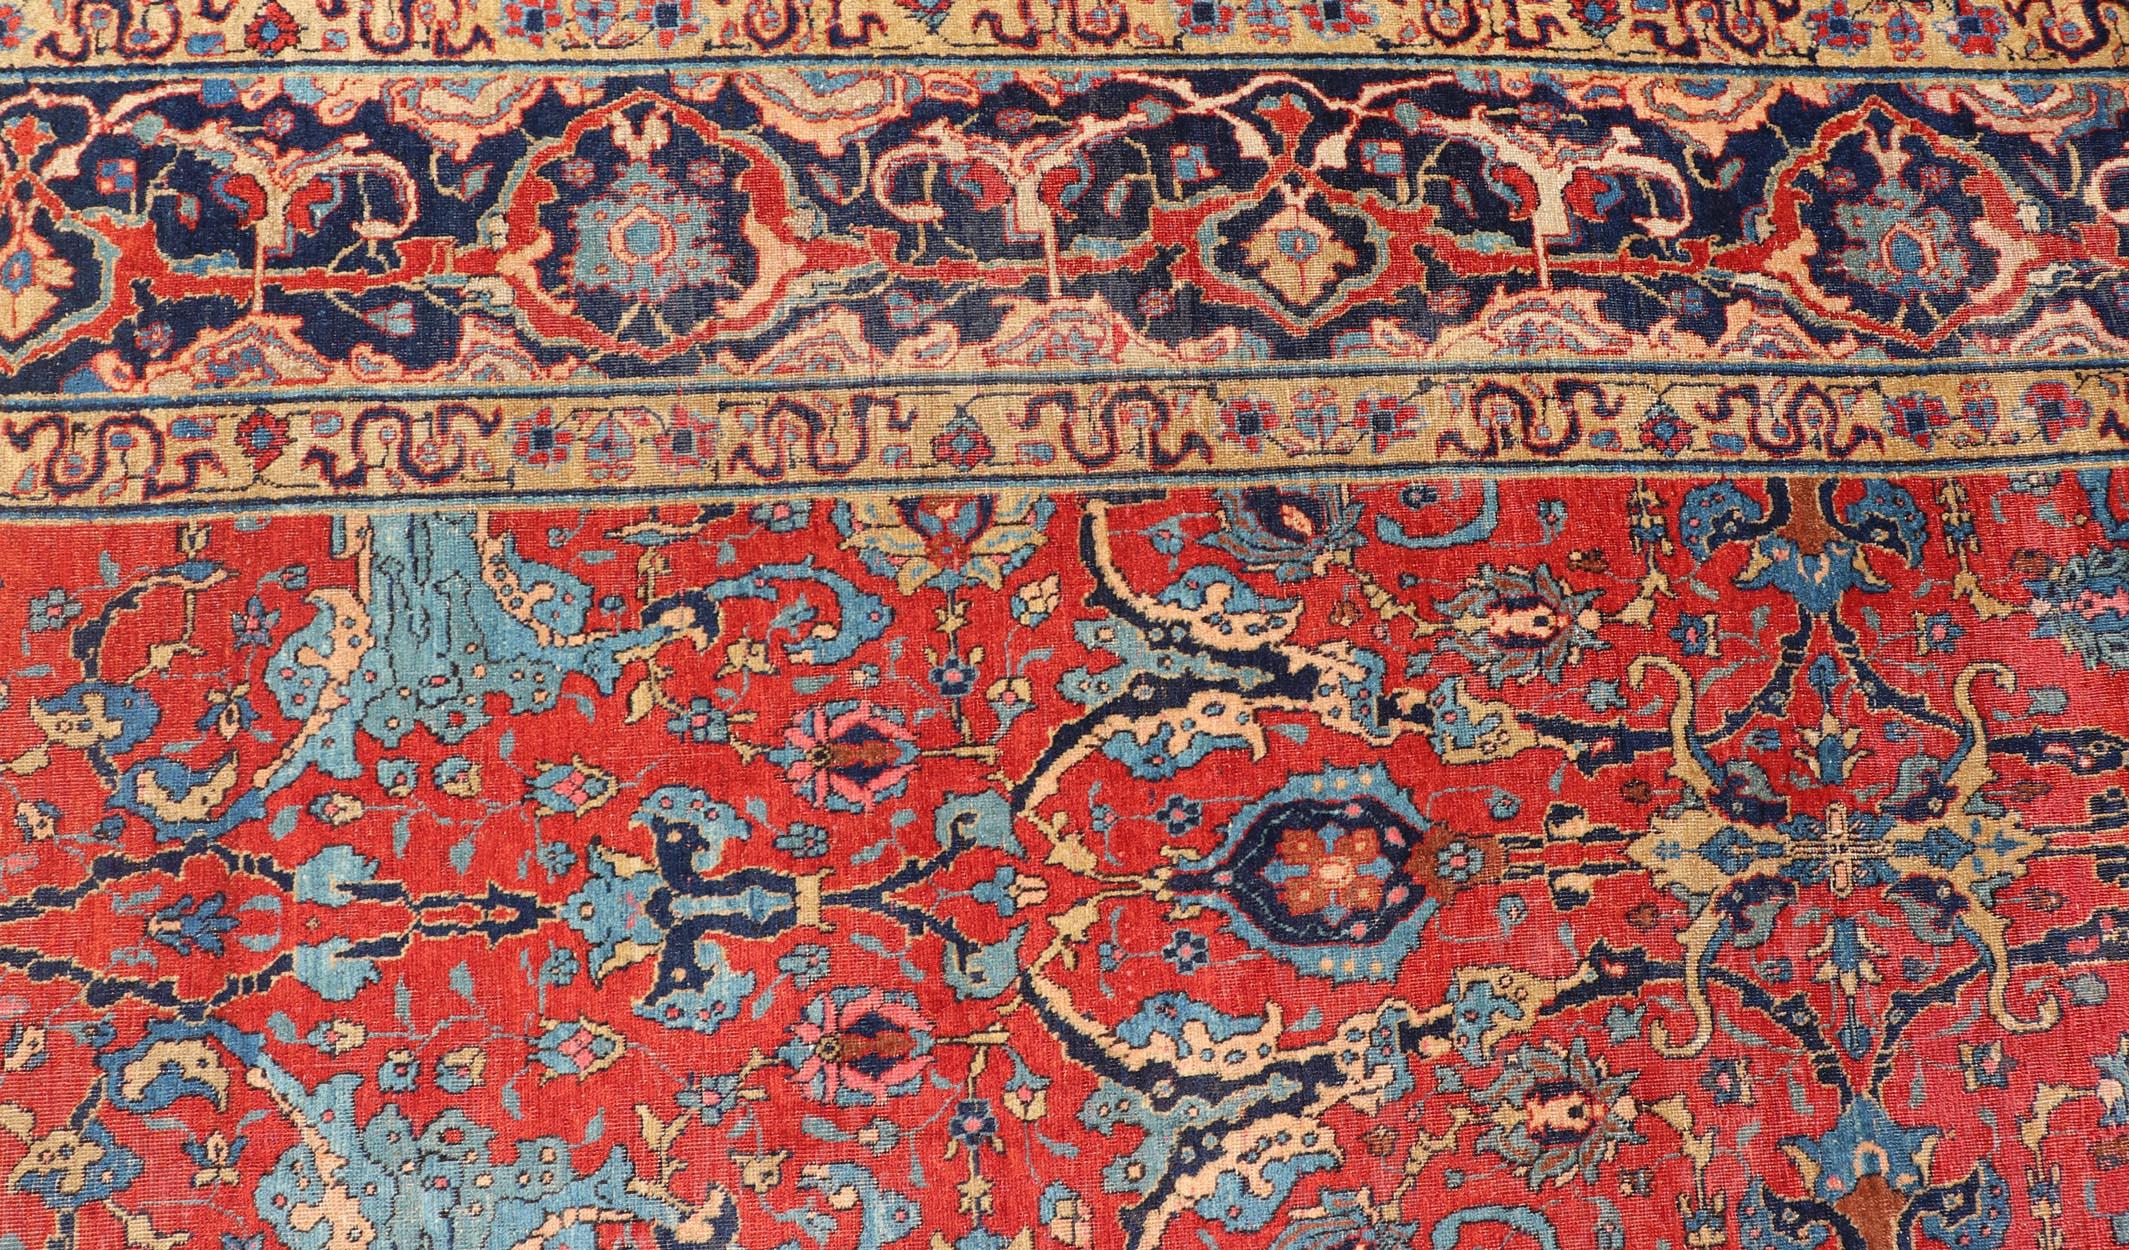 Wool Antique Tabriz Rug with All Over Design in Rust Red, Blue's, Yellow, and L. Blue For Sale